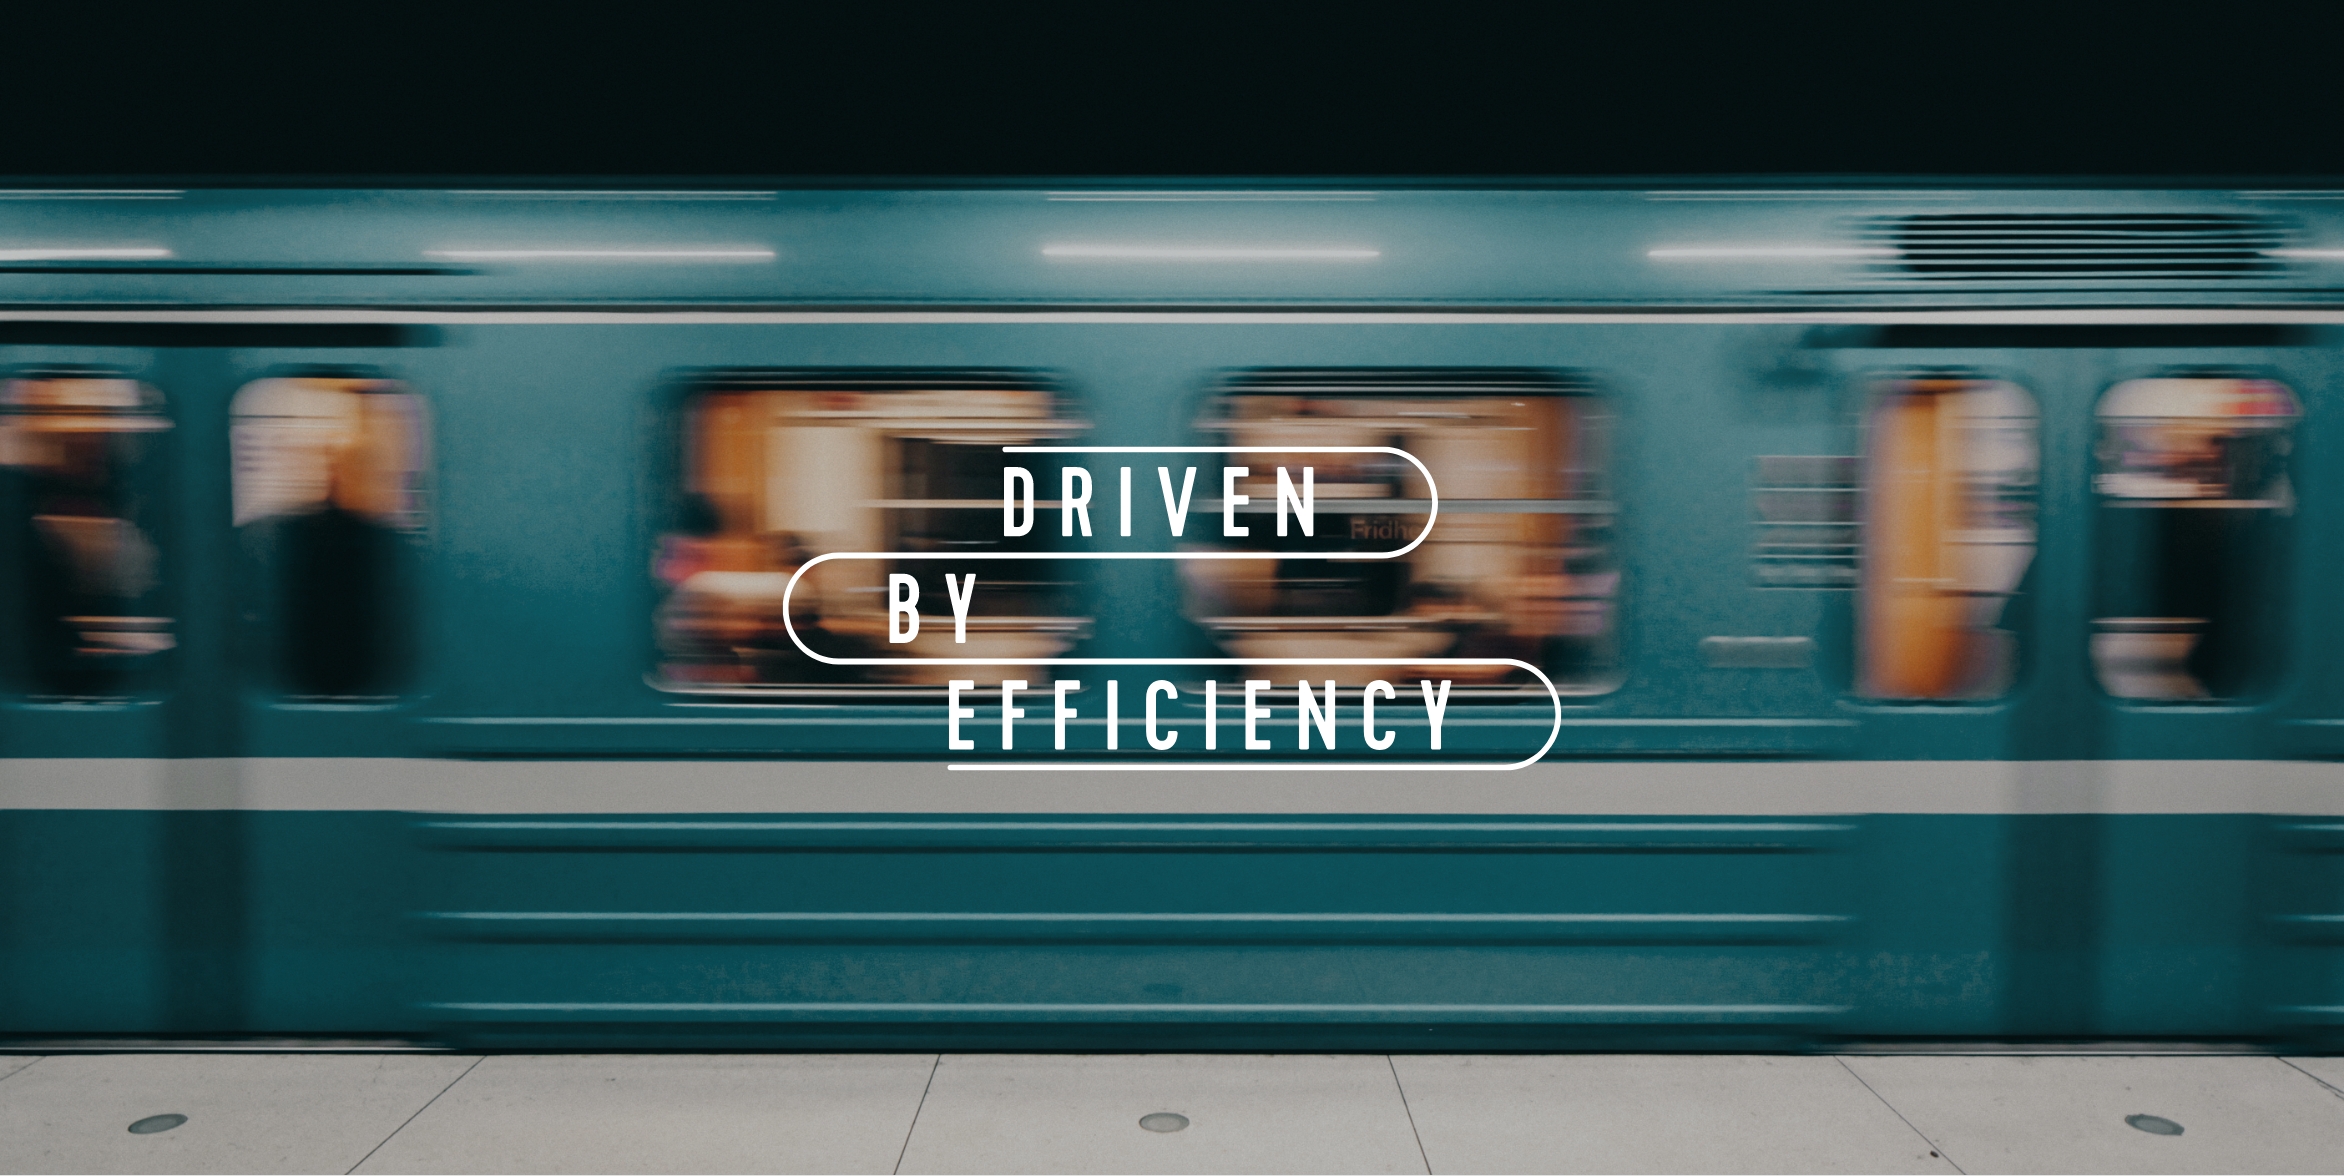 Driven by efficiency